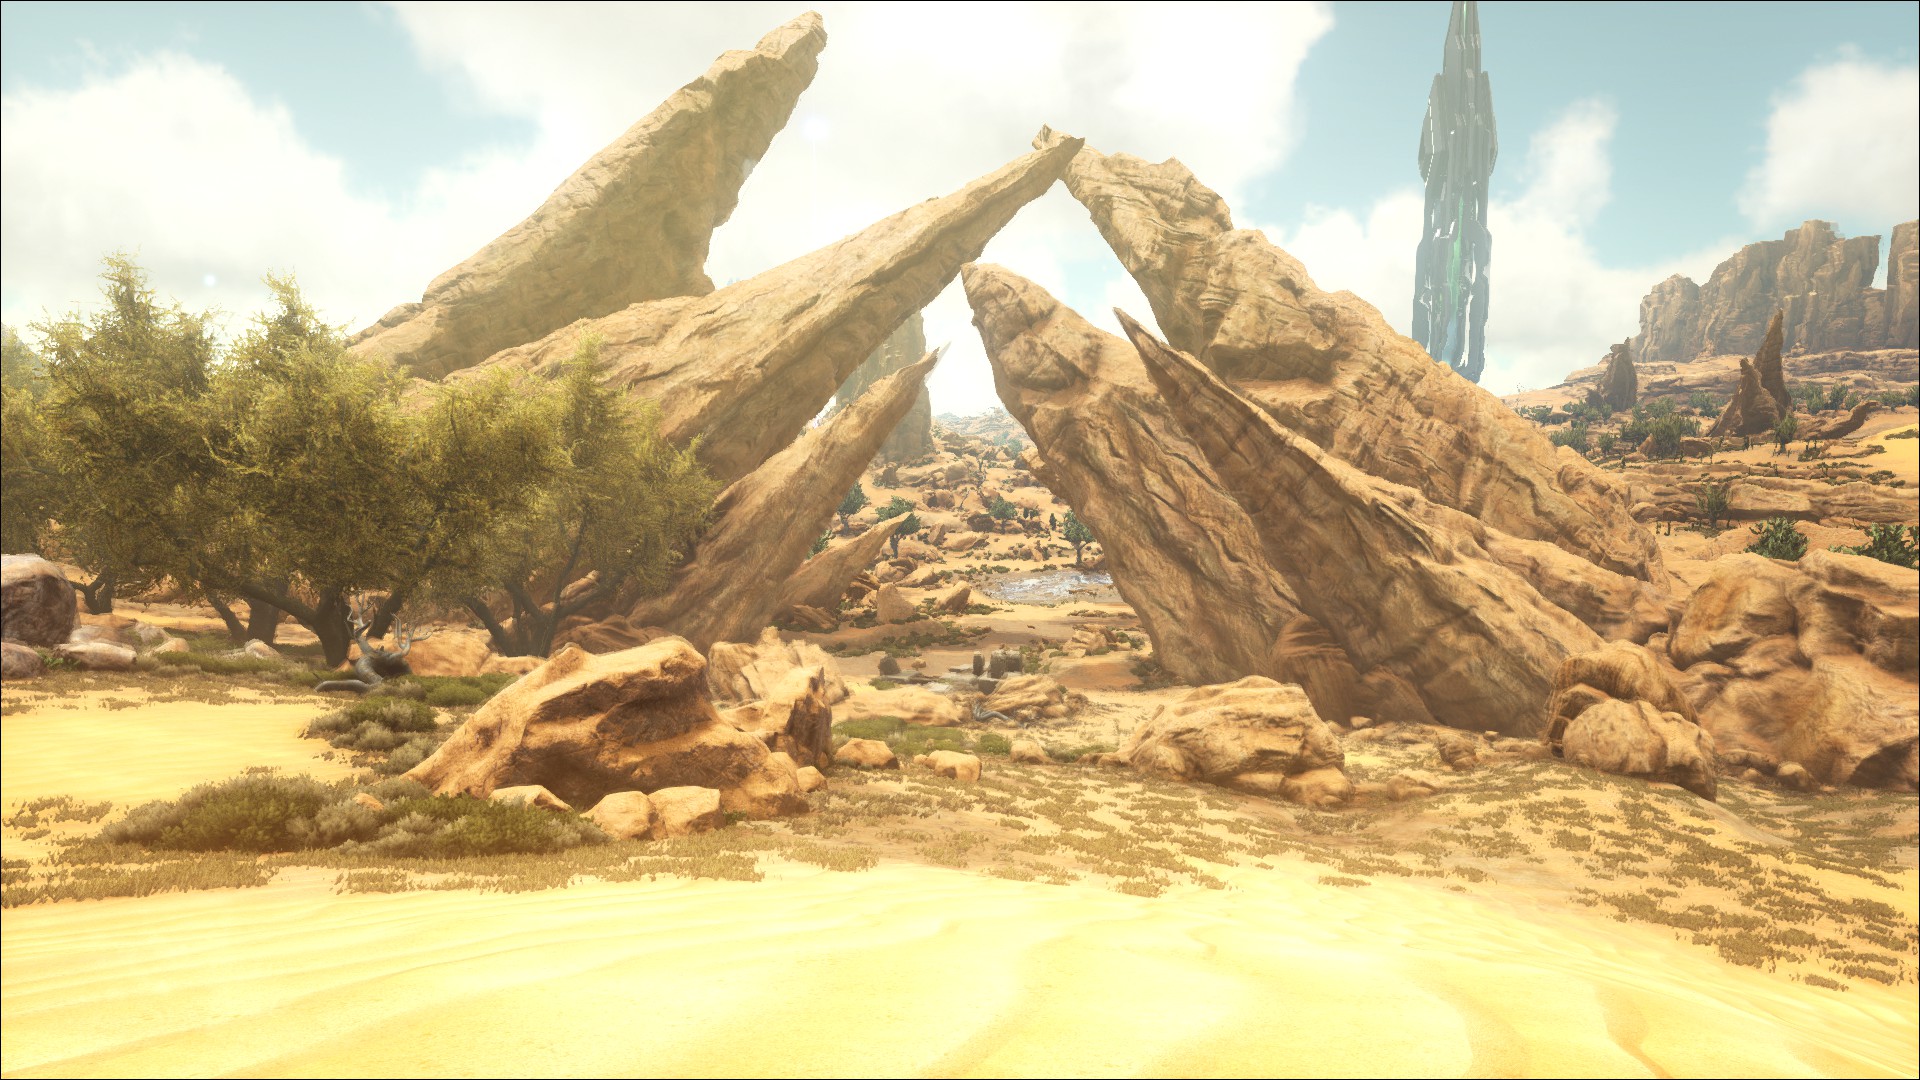 Southern East High Desert (Scorched Earth) ARK: Survival Evolved